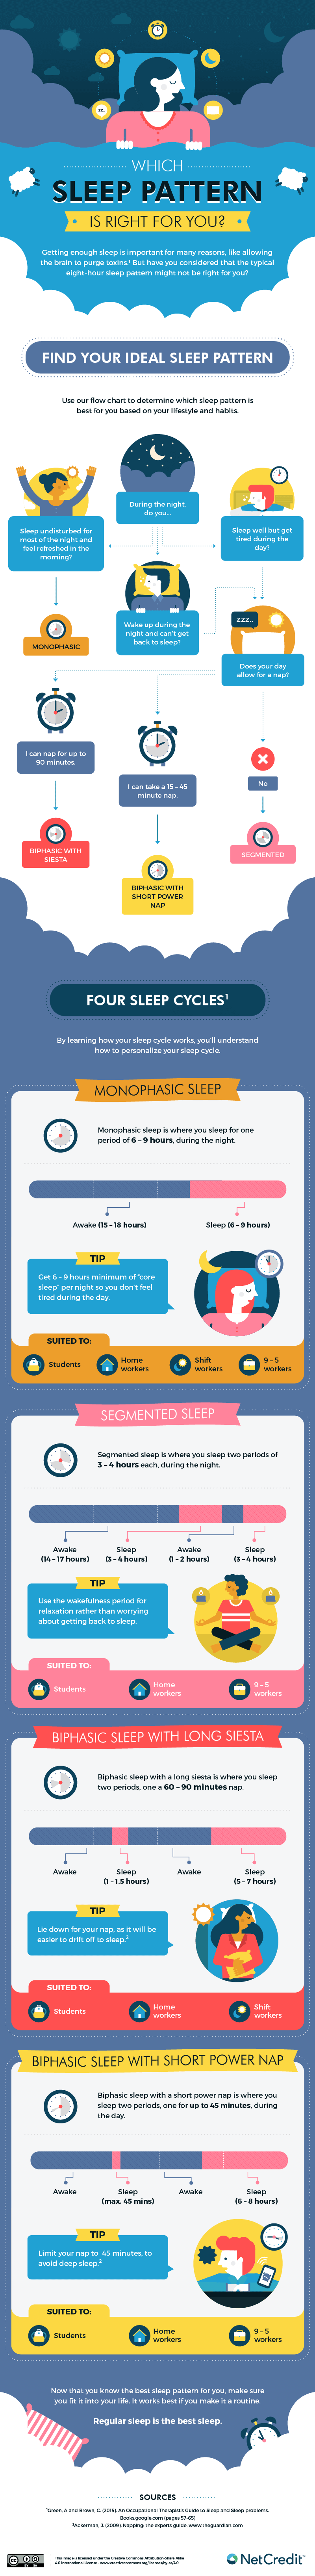 Which Sleep Pattern is Right for You? Infographic